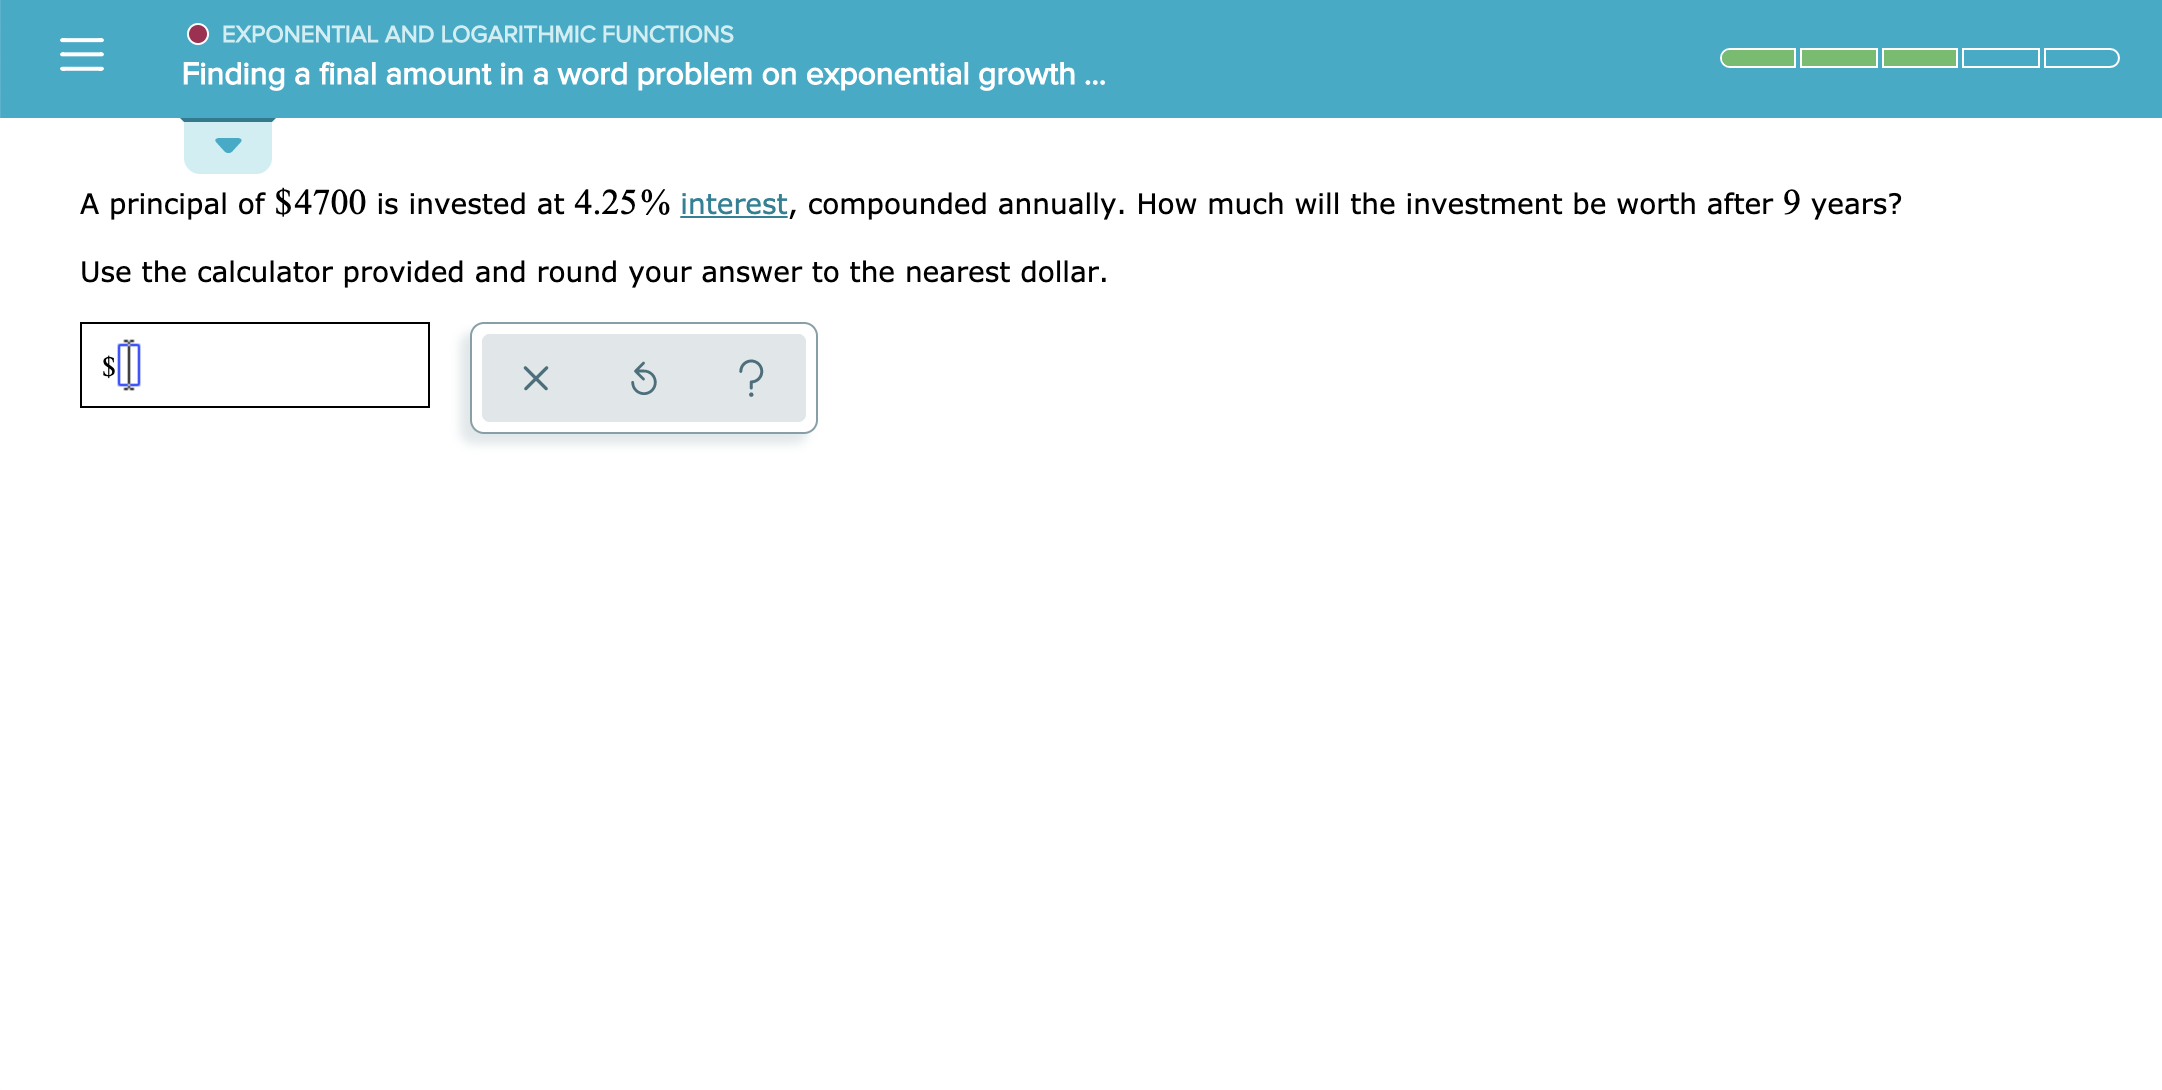 O EXPONENTIAL AND LOGARITH MIC FUNCTIONS
Finding a final amount in a word problem on exponential growth..
A principal of $4700 is invested at 4.25% interest, compounded annually. How much will the investment be worth after 9 years?
Use the calculator provided and round your answer to the nearest dollar.
X
